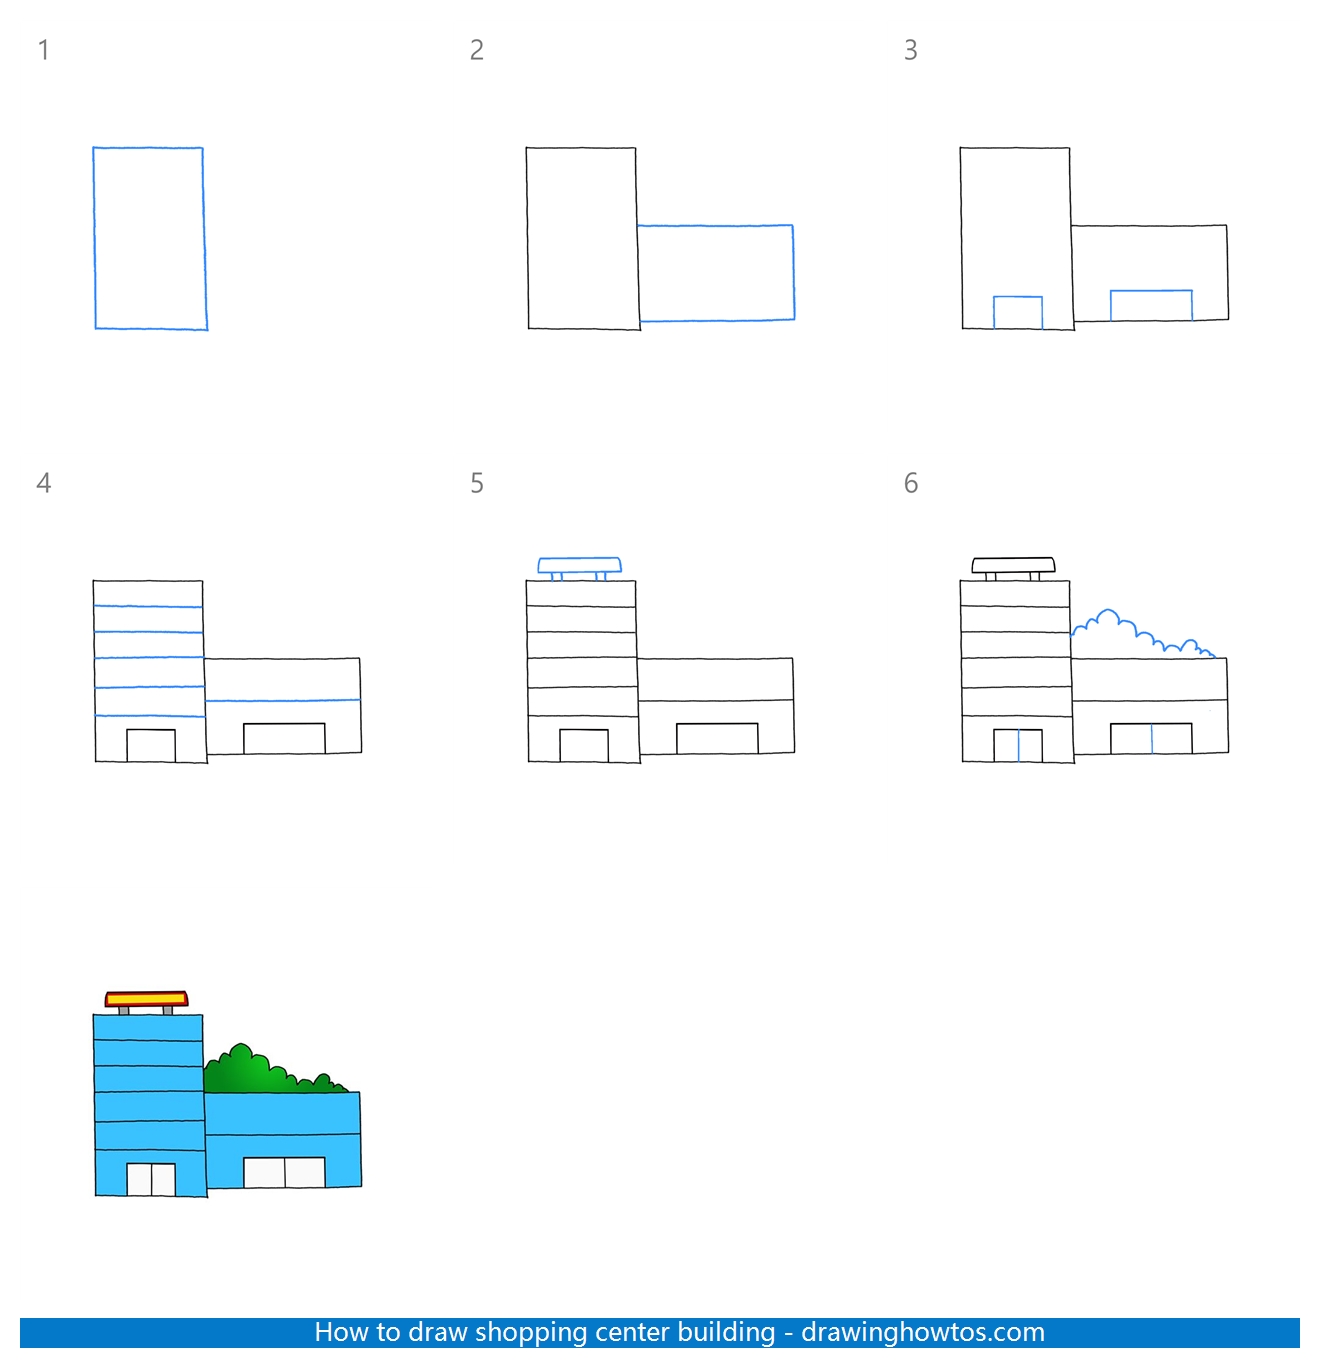 How to Draw a Shopping Center Building Step by Step